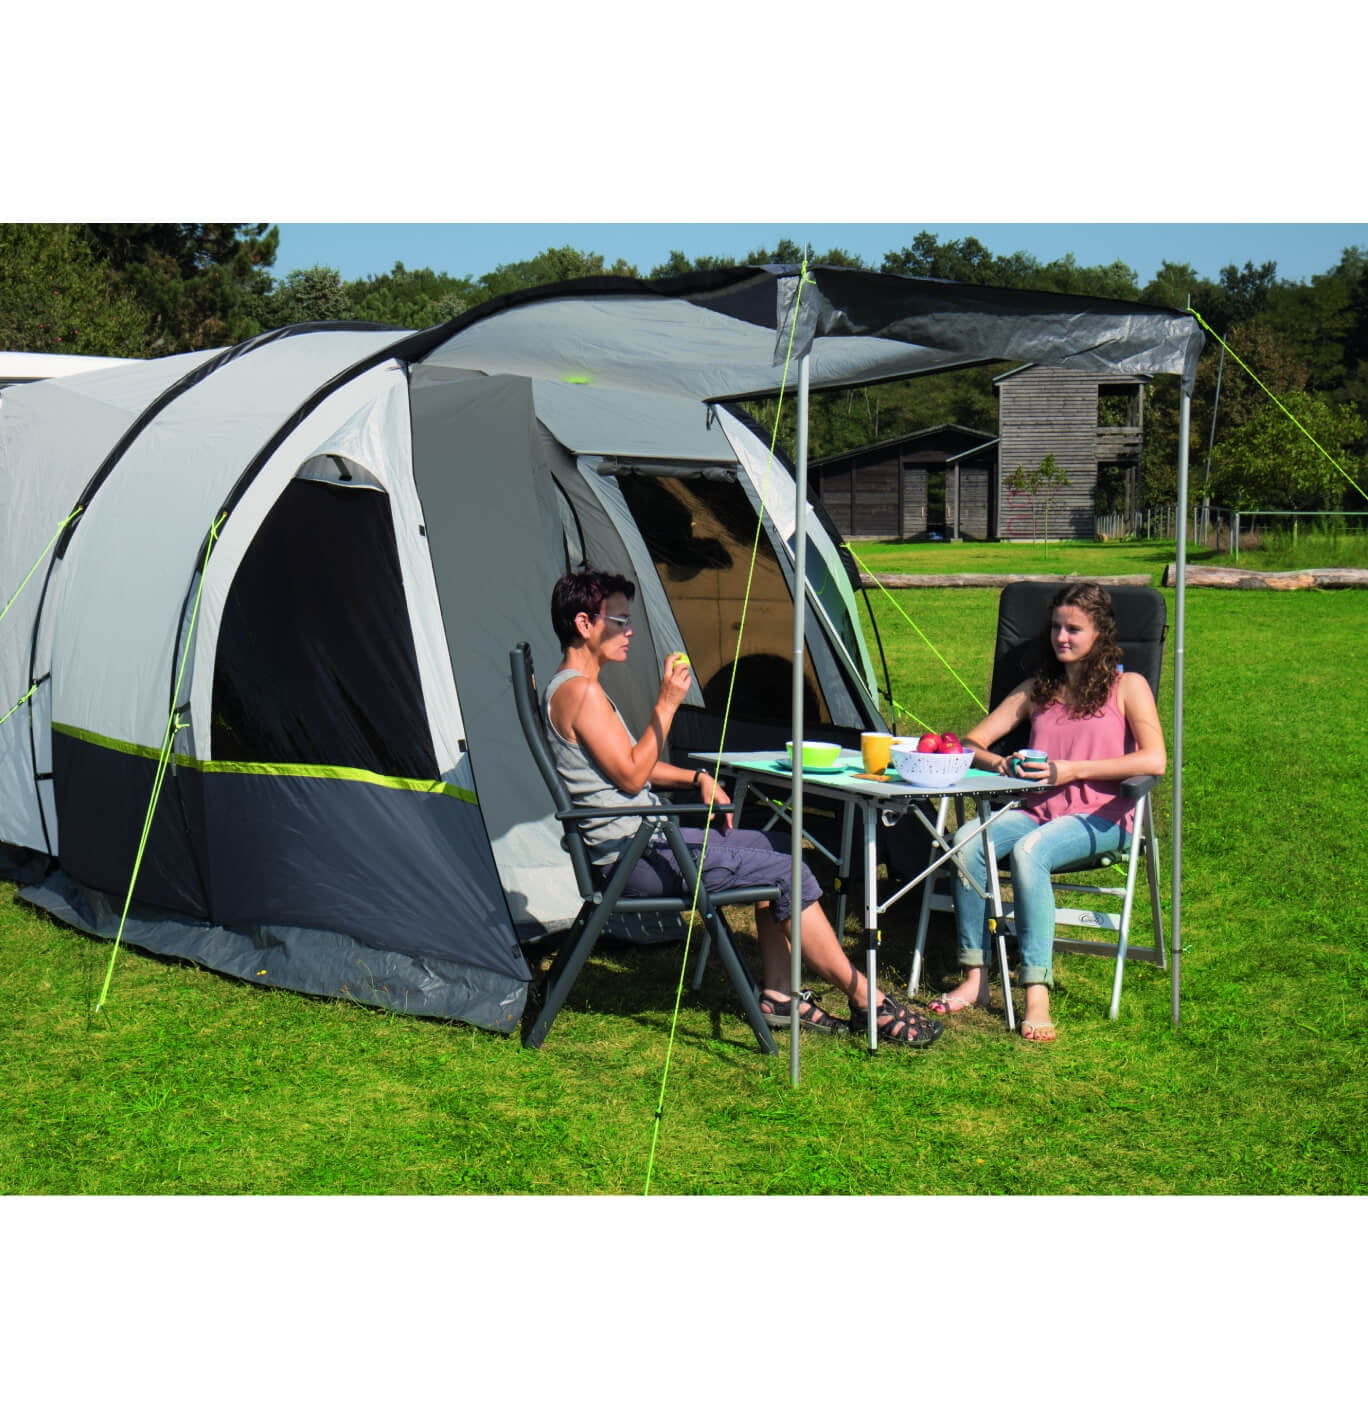 Tour compact drive away awning with people sitting outside and enjoying the sun